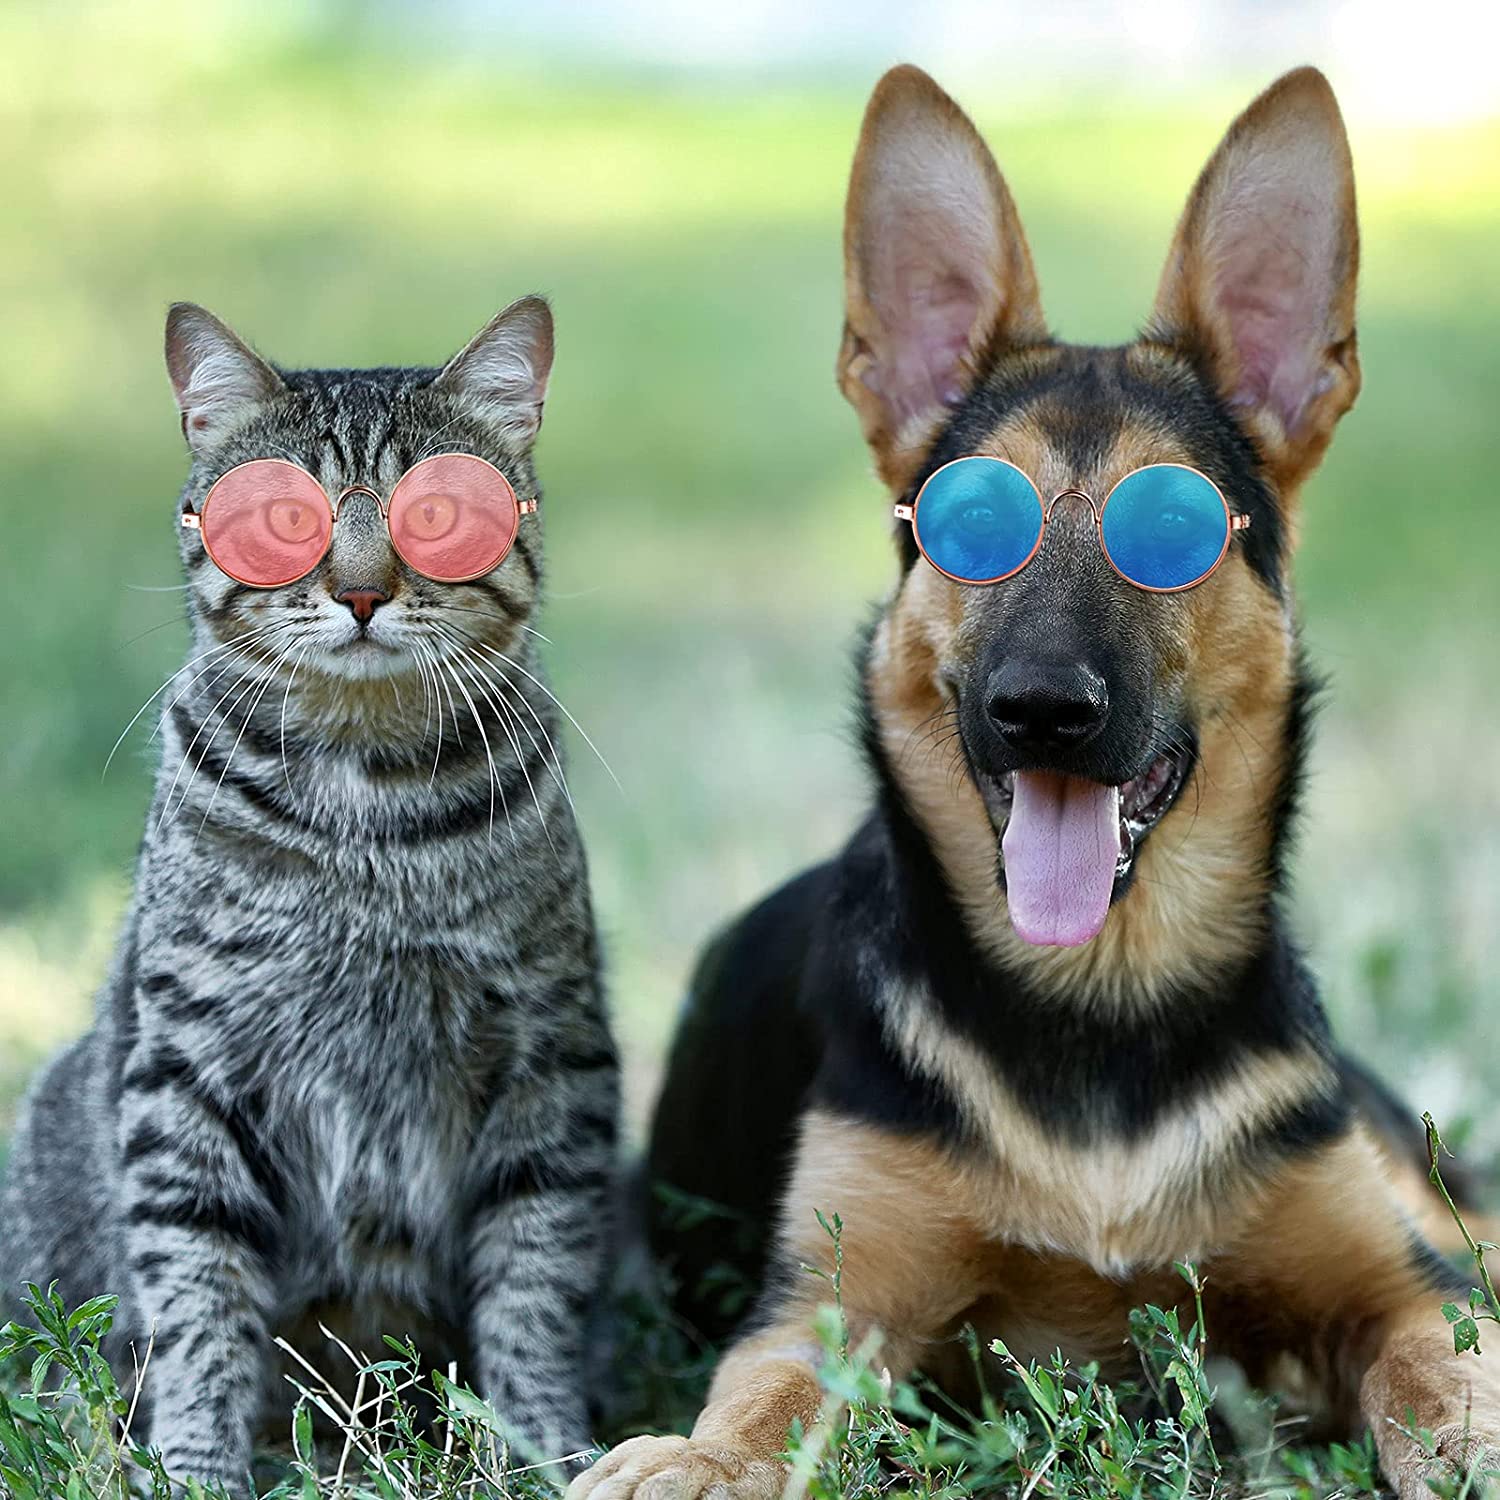 Pet SunGlasses for Dogs and Cats (Lennon Style)